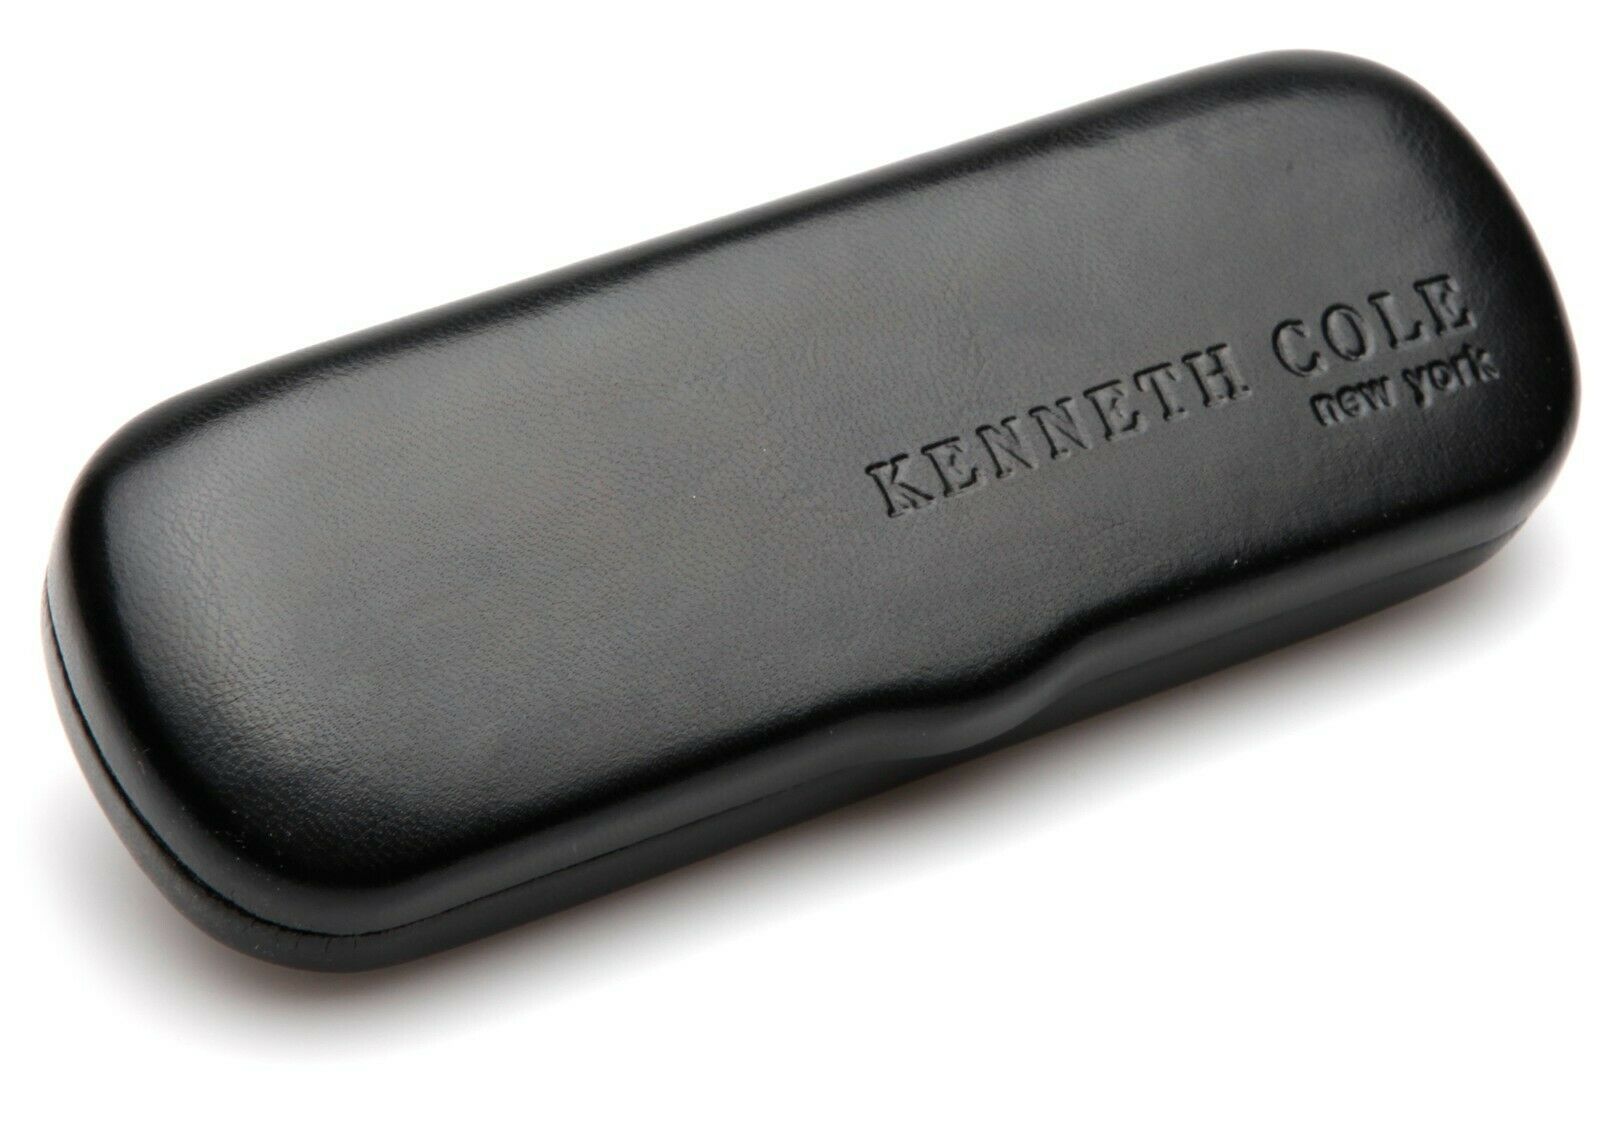 New KENNETH COLE New York BLACK SMALL CASE For Eyeglasses Glasses 157x56x28mm - £8.44 GBP